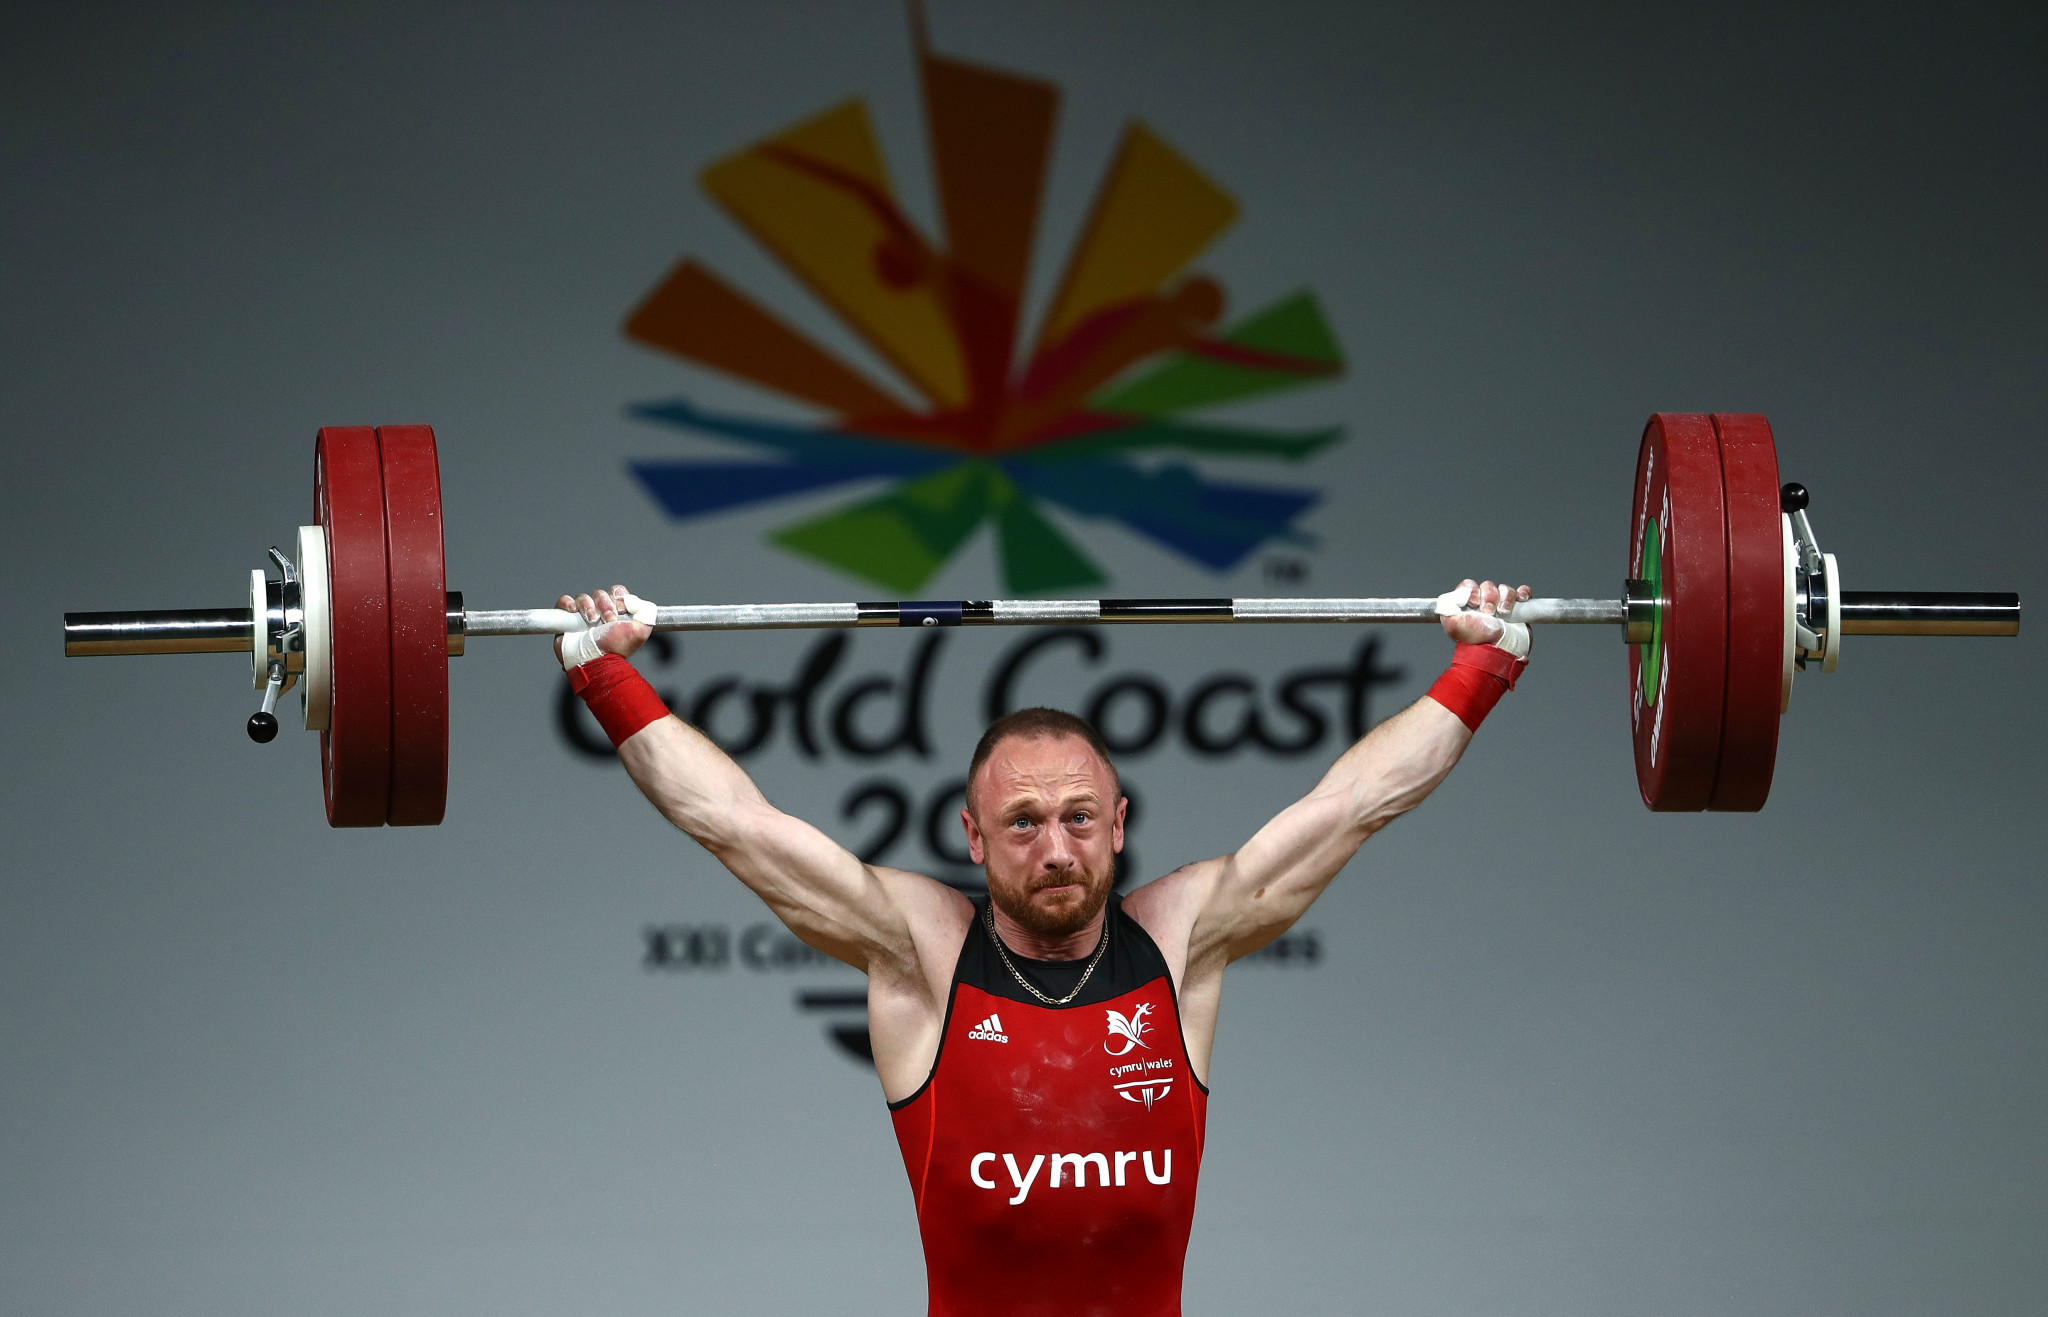 Gareth Evans was one of 10 Welsh gold medallists at Gold Coast 2018 ©Getty Images